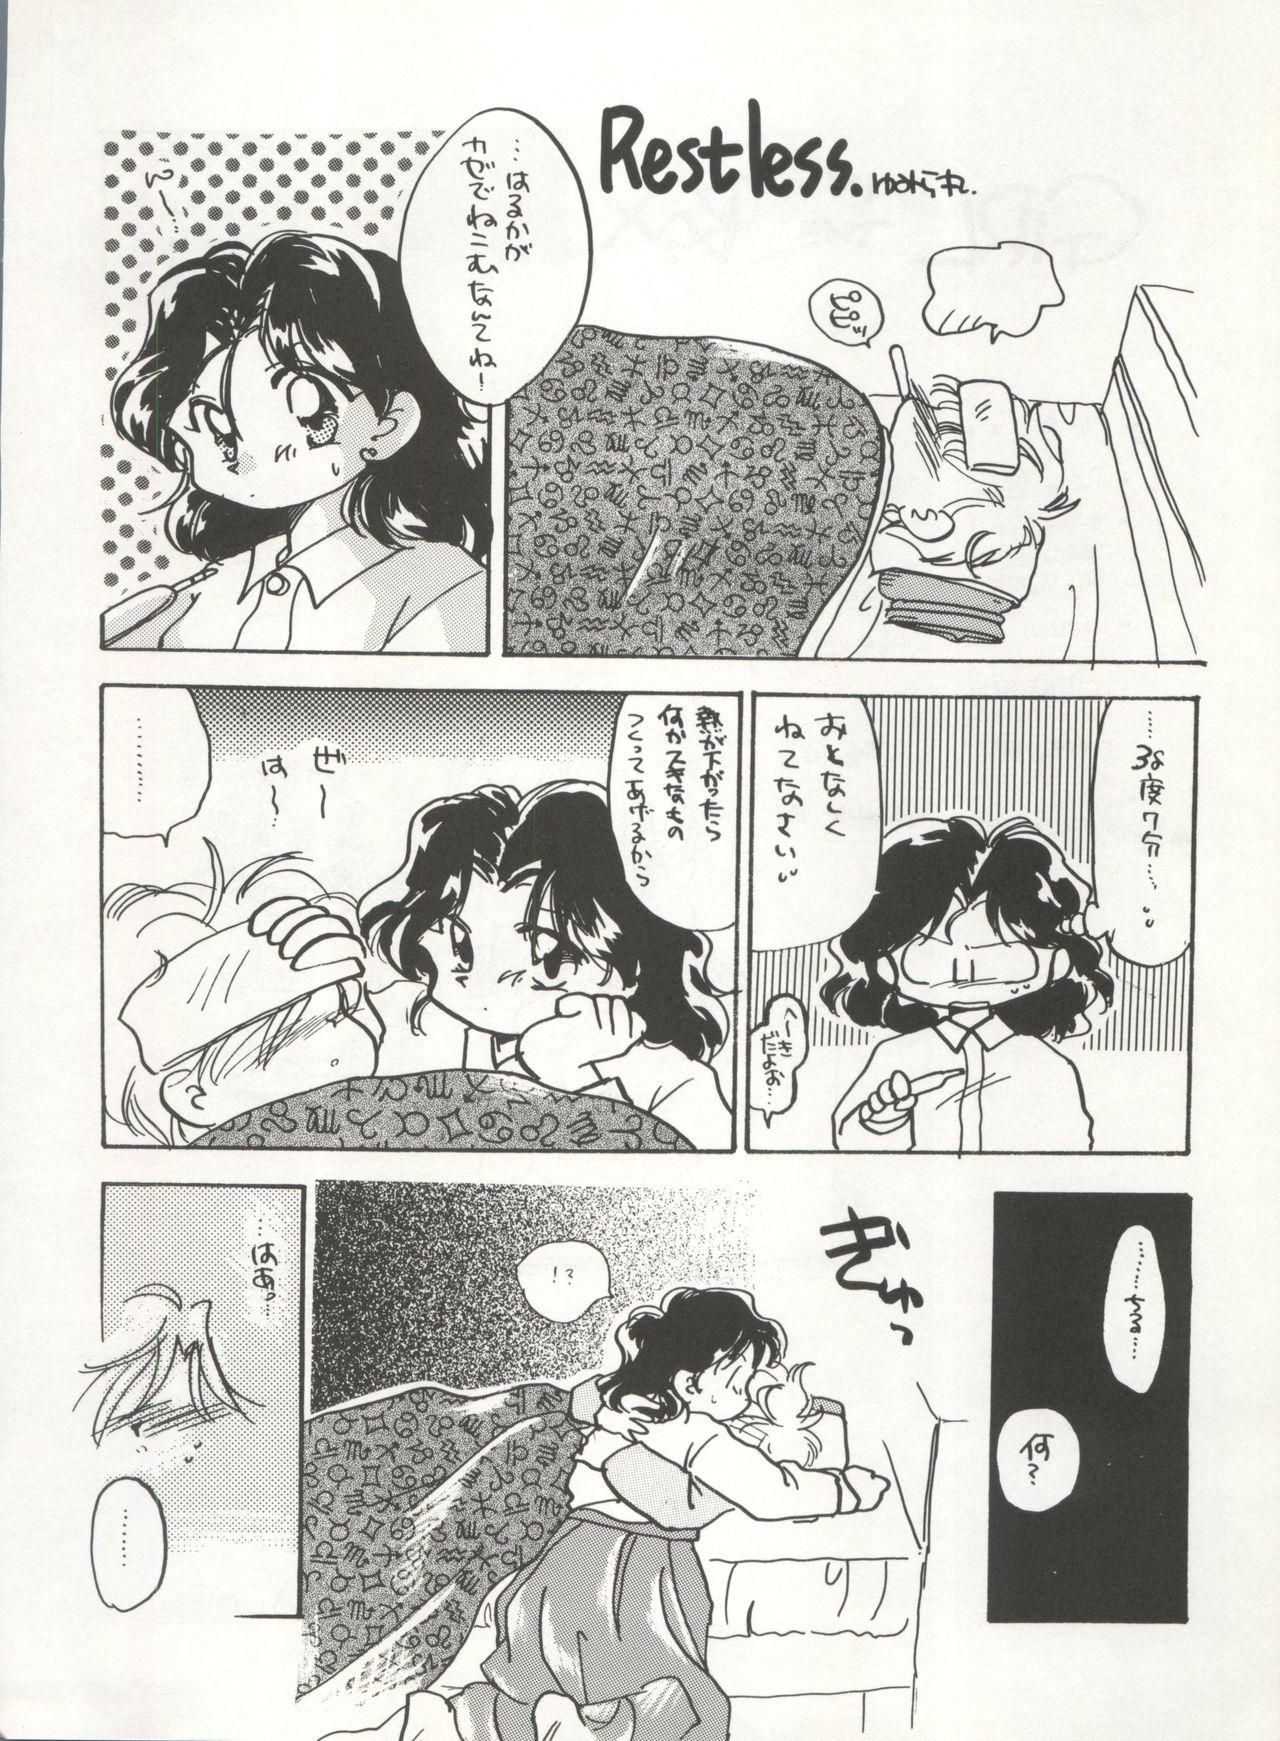 Fingers GIRL IN THE BOX - Marmalade boy Mexico - Page 4